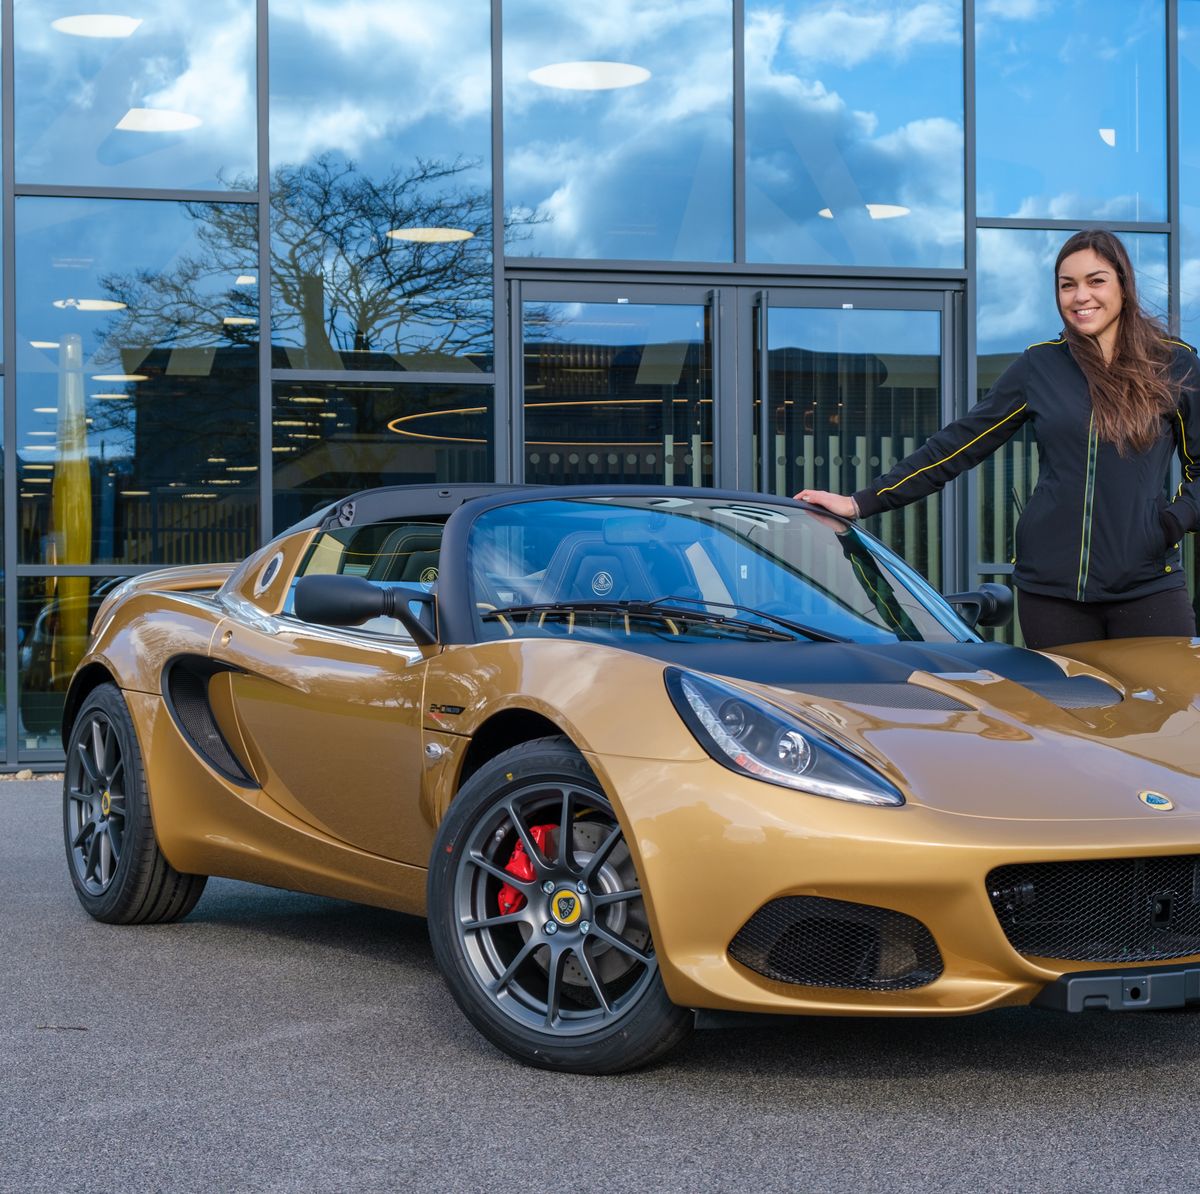 The Lotus Elise Was Named For Her. Now She Owns the Last One Made